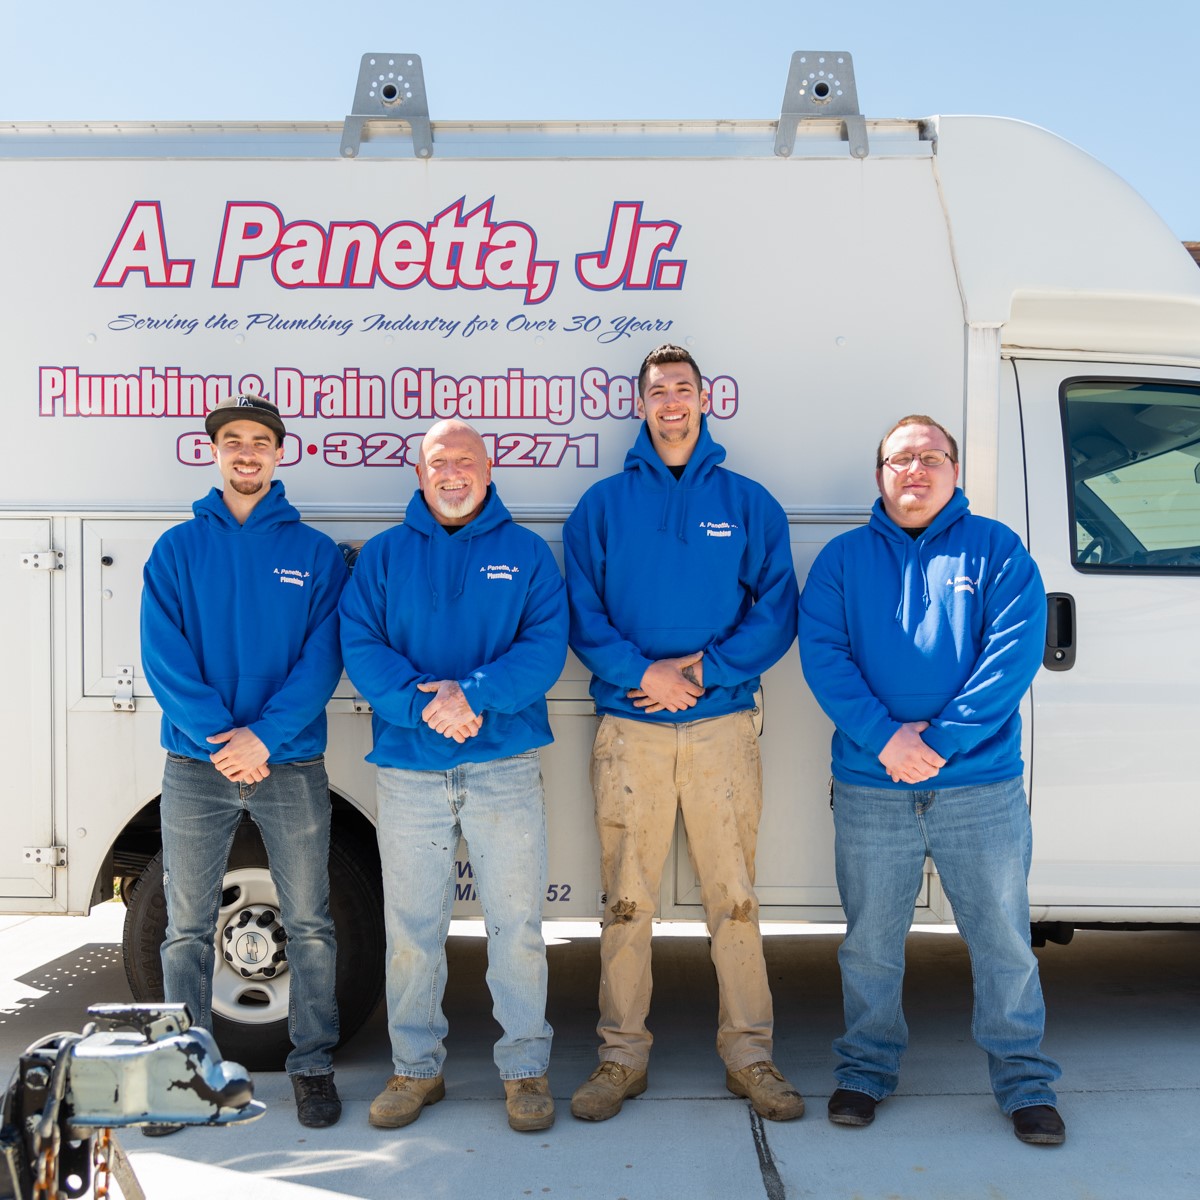 Albert Panetta Jr Plumbing and Drain Cleaning 204 Browning Ave S, Somerdale New Jersey 08083